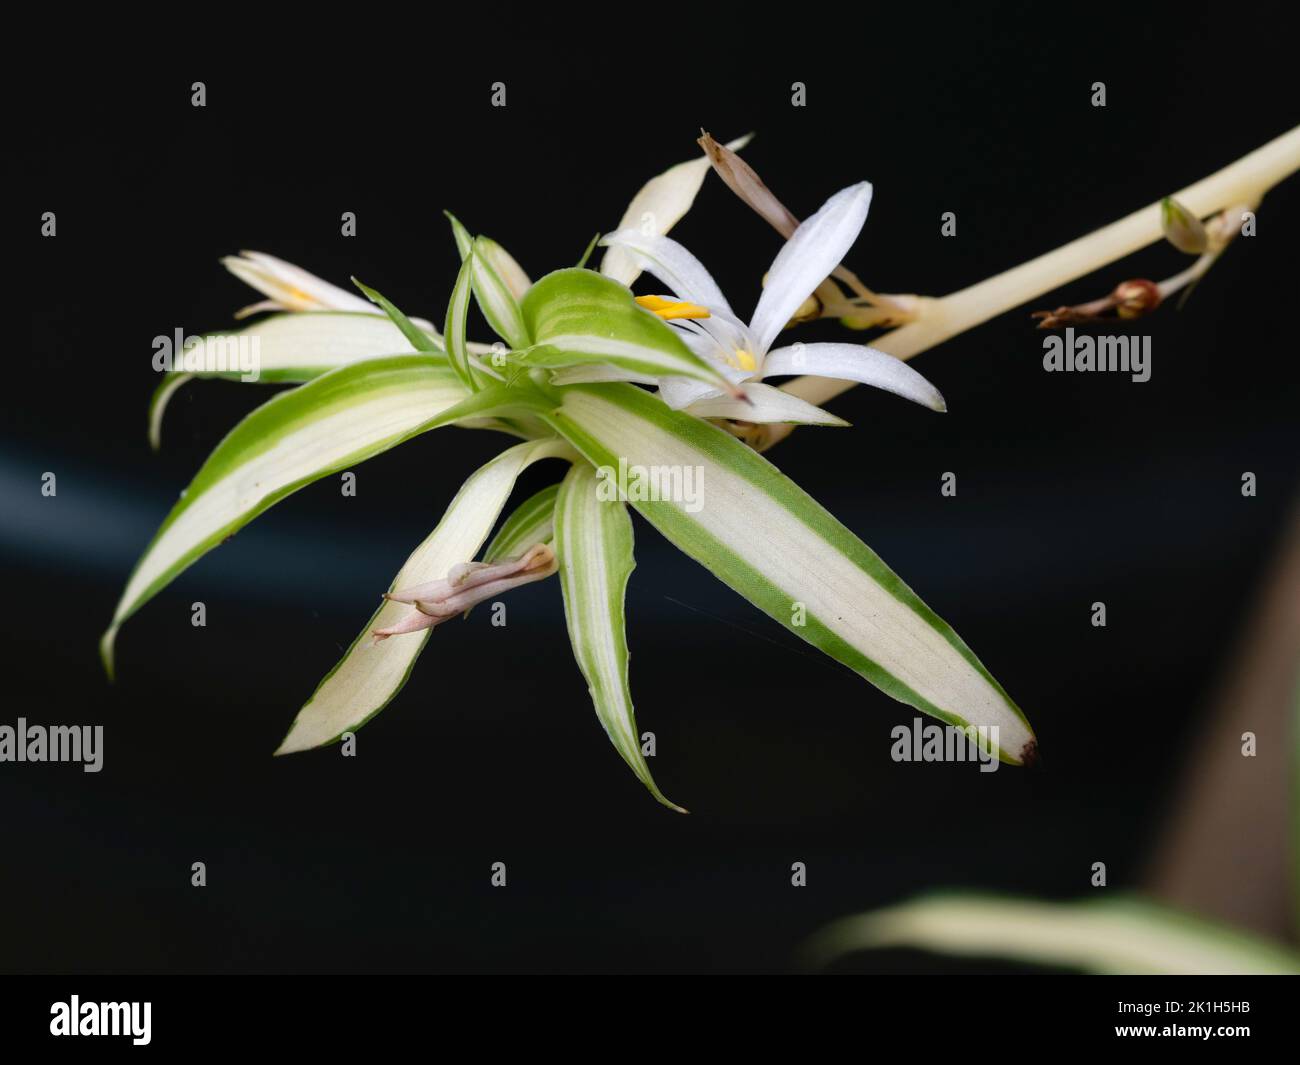 White flower and variegated evergreen foliage of a developing offset of the popular spider plant Chlorophytum comosum 'Variegatum' Stock Photo